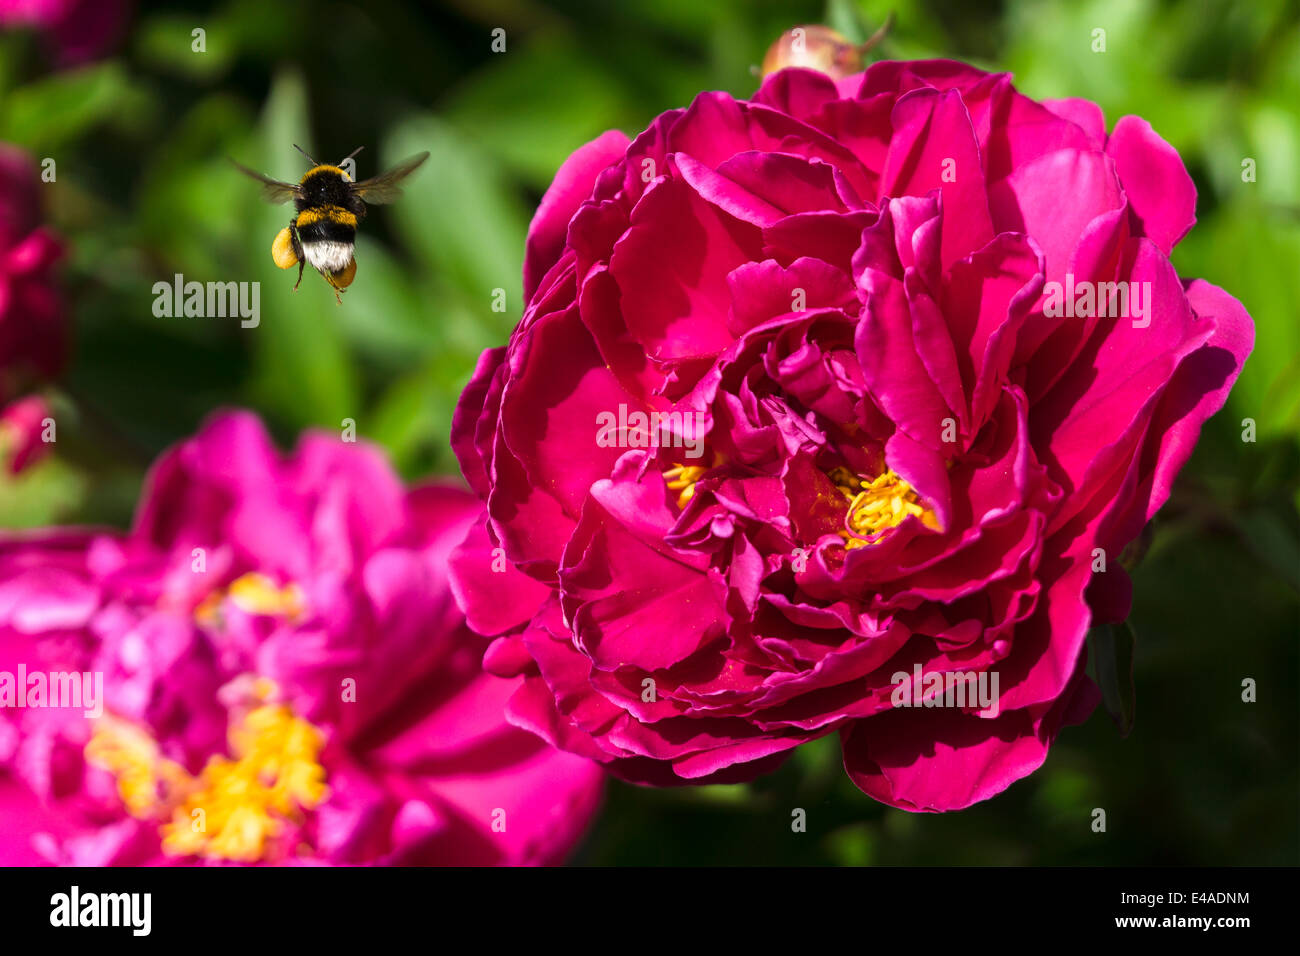 Germany, Hesse, Pink peony, Paeonia, and Buff-tailed bumblebee, Bombus terrestris, flying Stock Photo